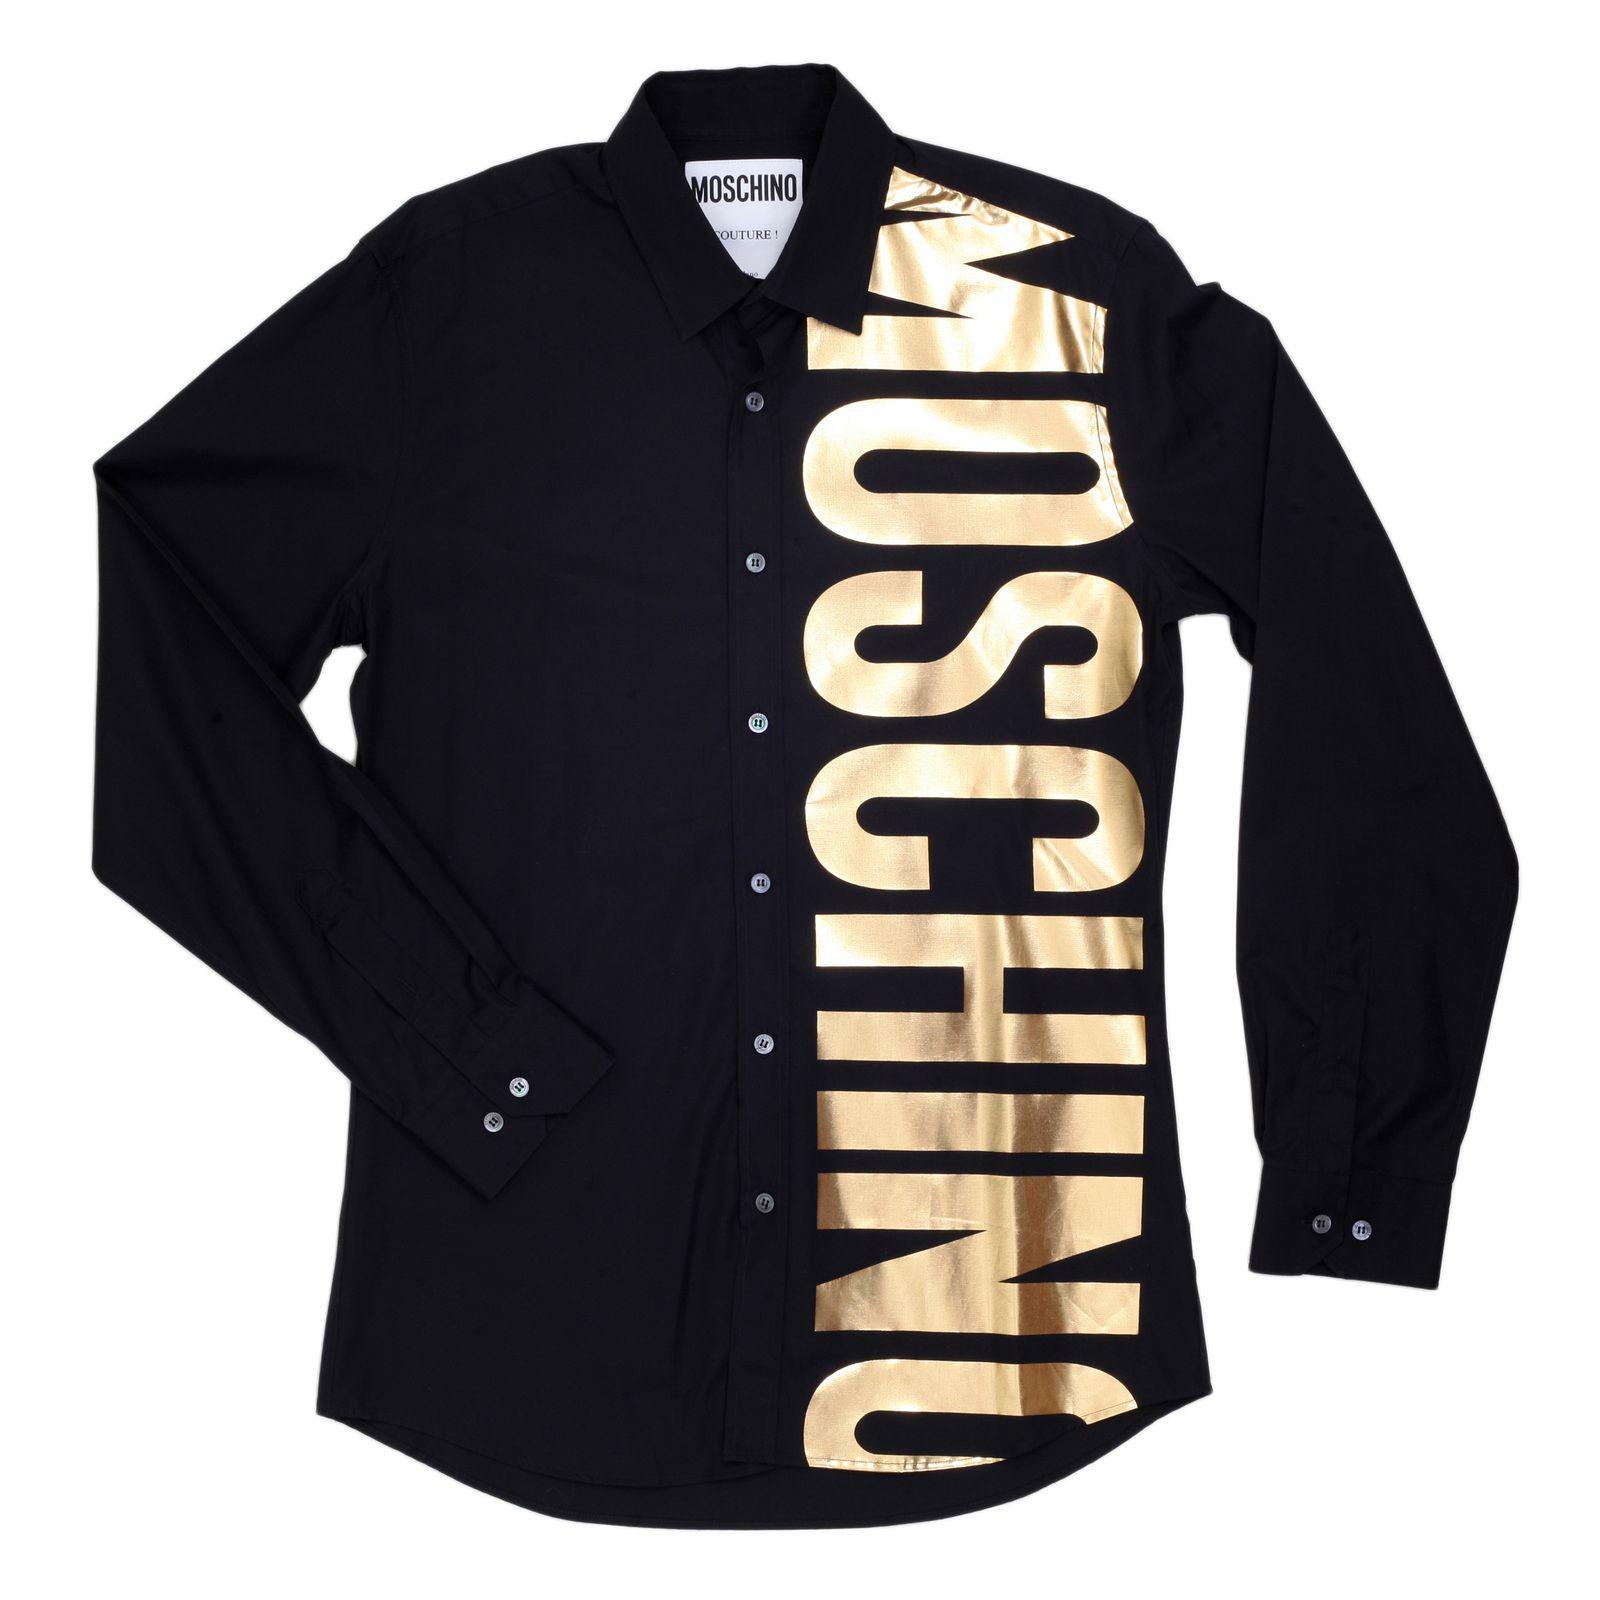 Moschino Gold Logo - Buy Long Sleeve Black Shirt with Large Gold Text Logo